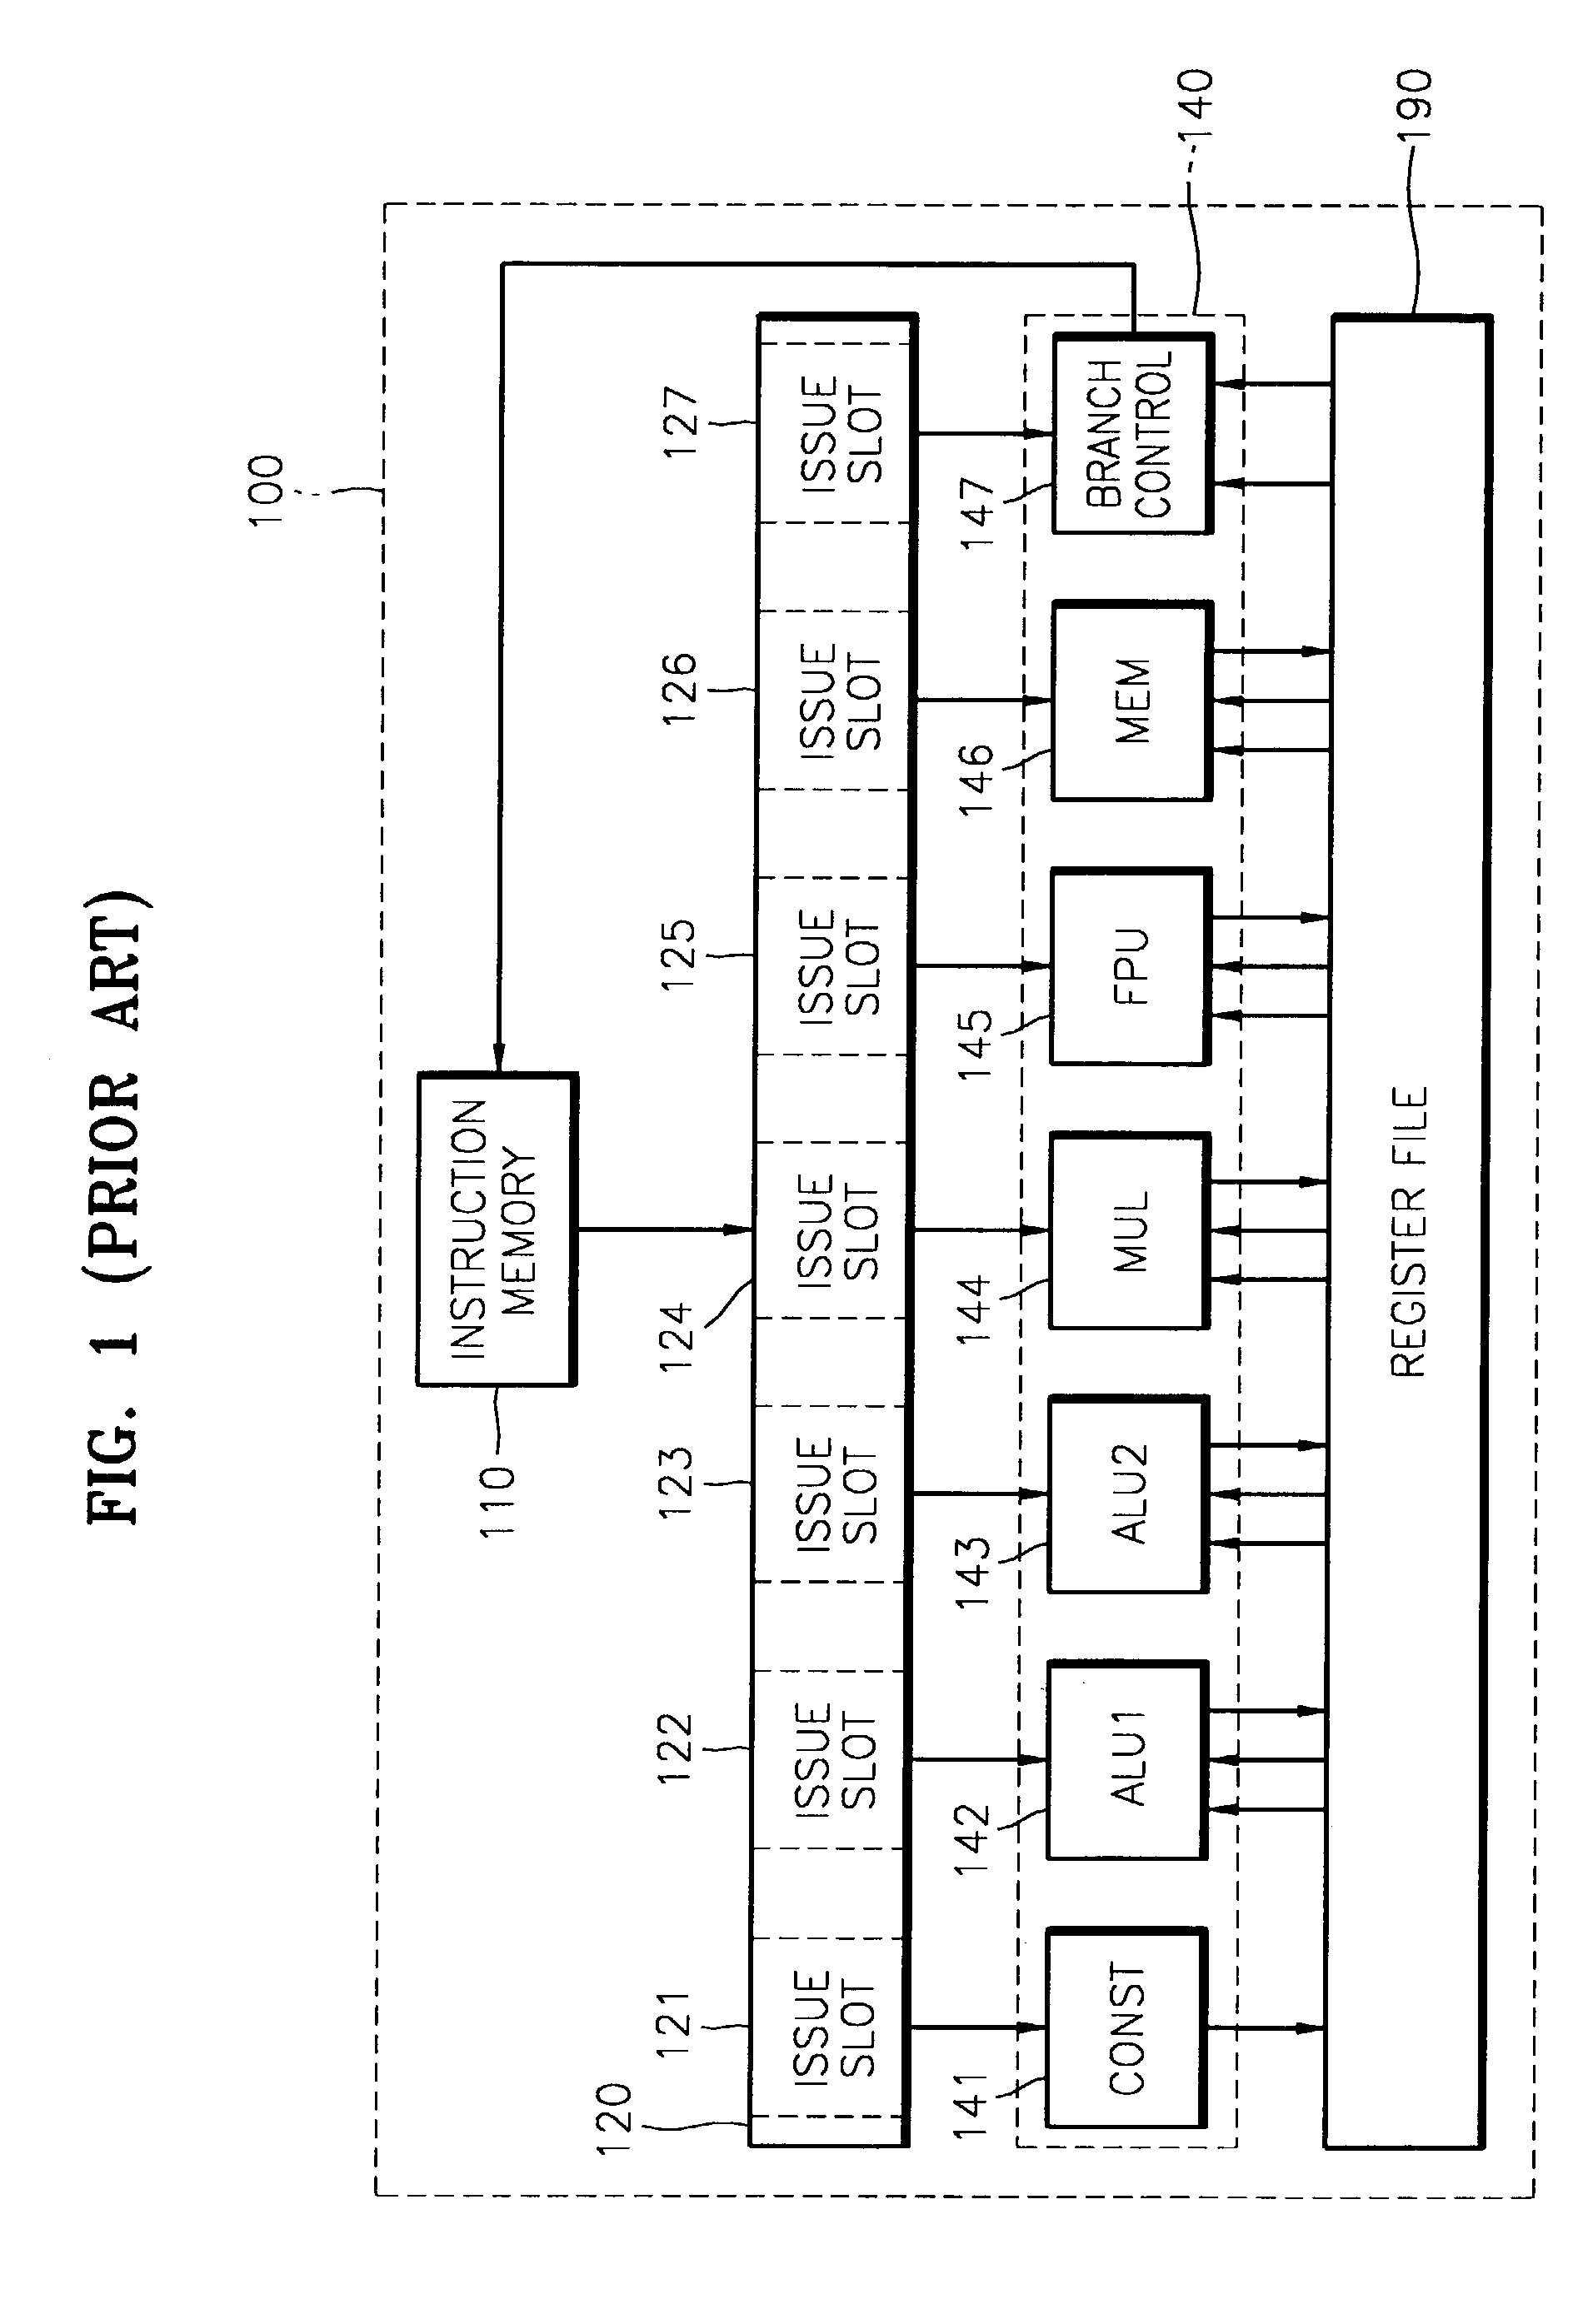 Apparatus and method for dispatching very long instruction word having variable length